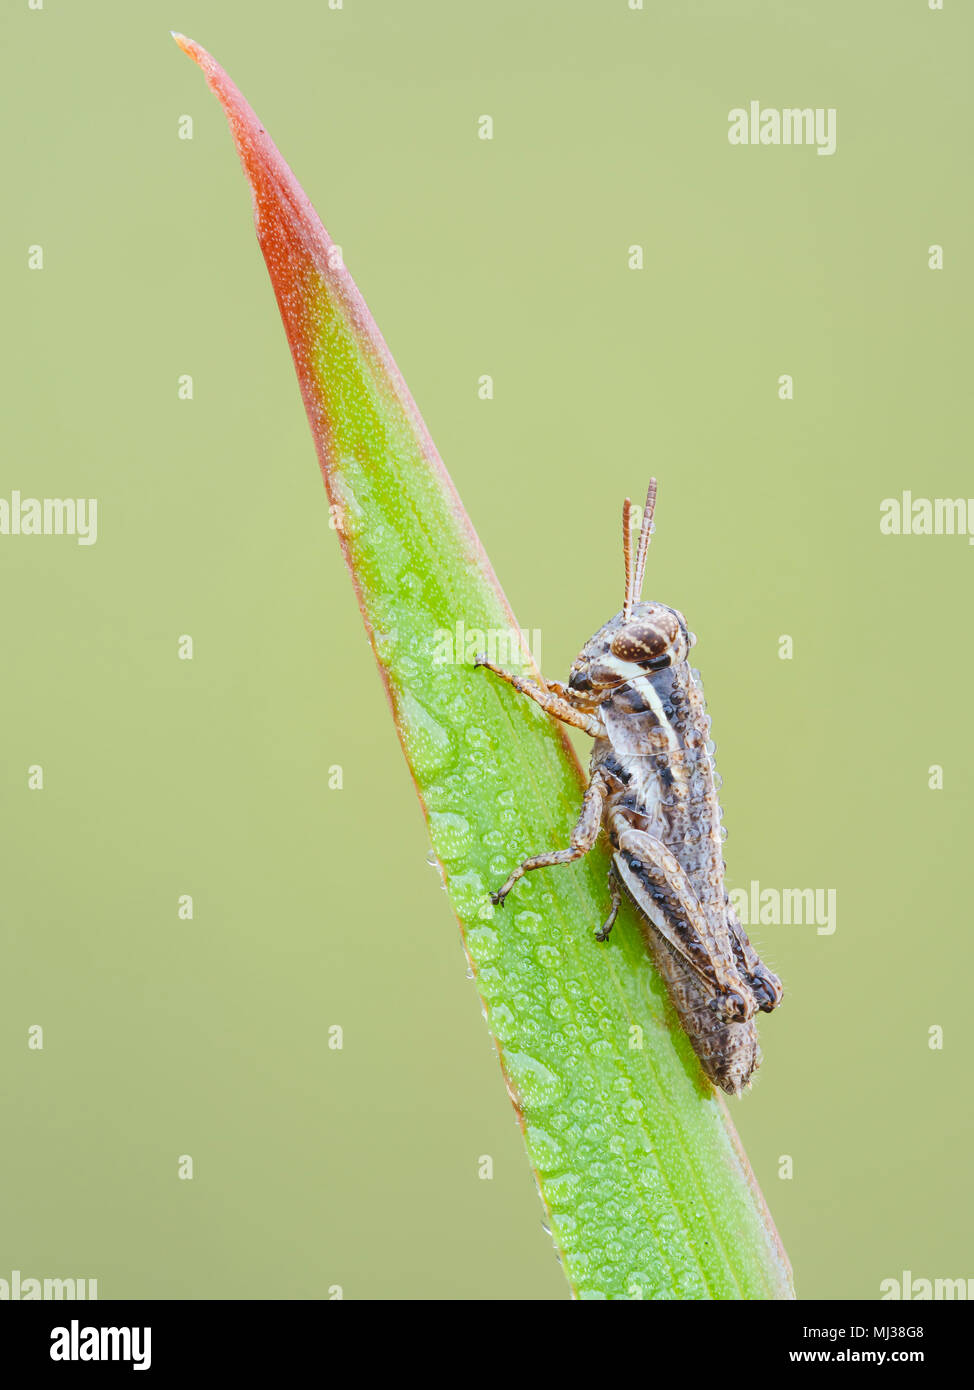 A dew-covered Spur-throated Grasshopper (Paroxya sp.) nymph perches on a blade of grass in the cool air of early morning. Stock Photo